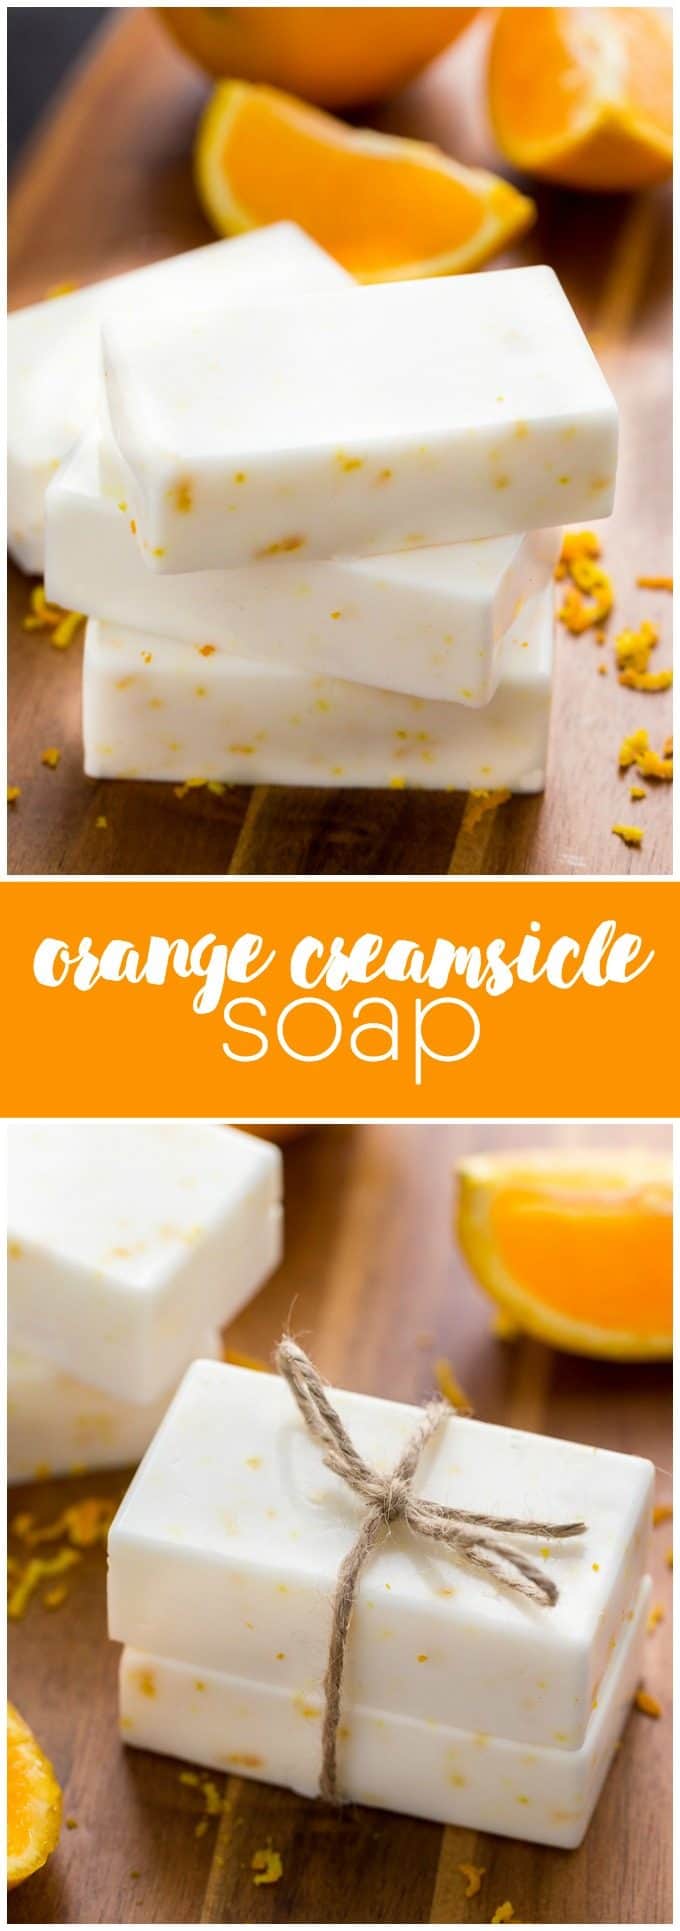 Orange Creamsicle Soap - Smells like a dream! I can't get enough of the vanilla + orange scent combo.